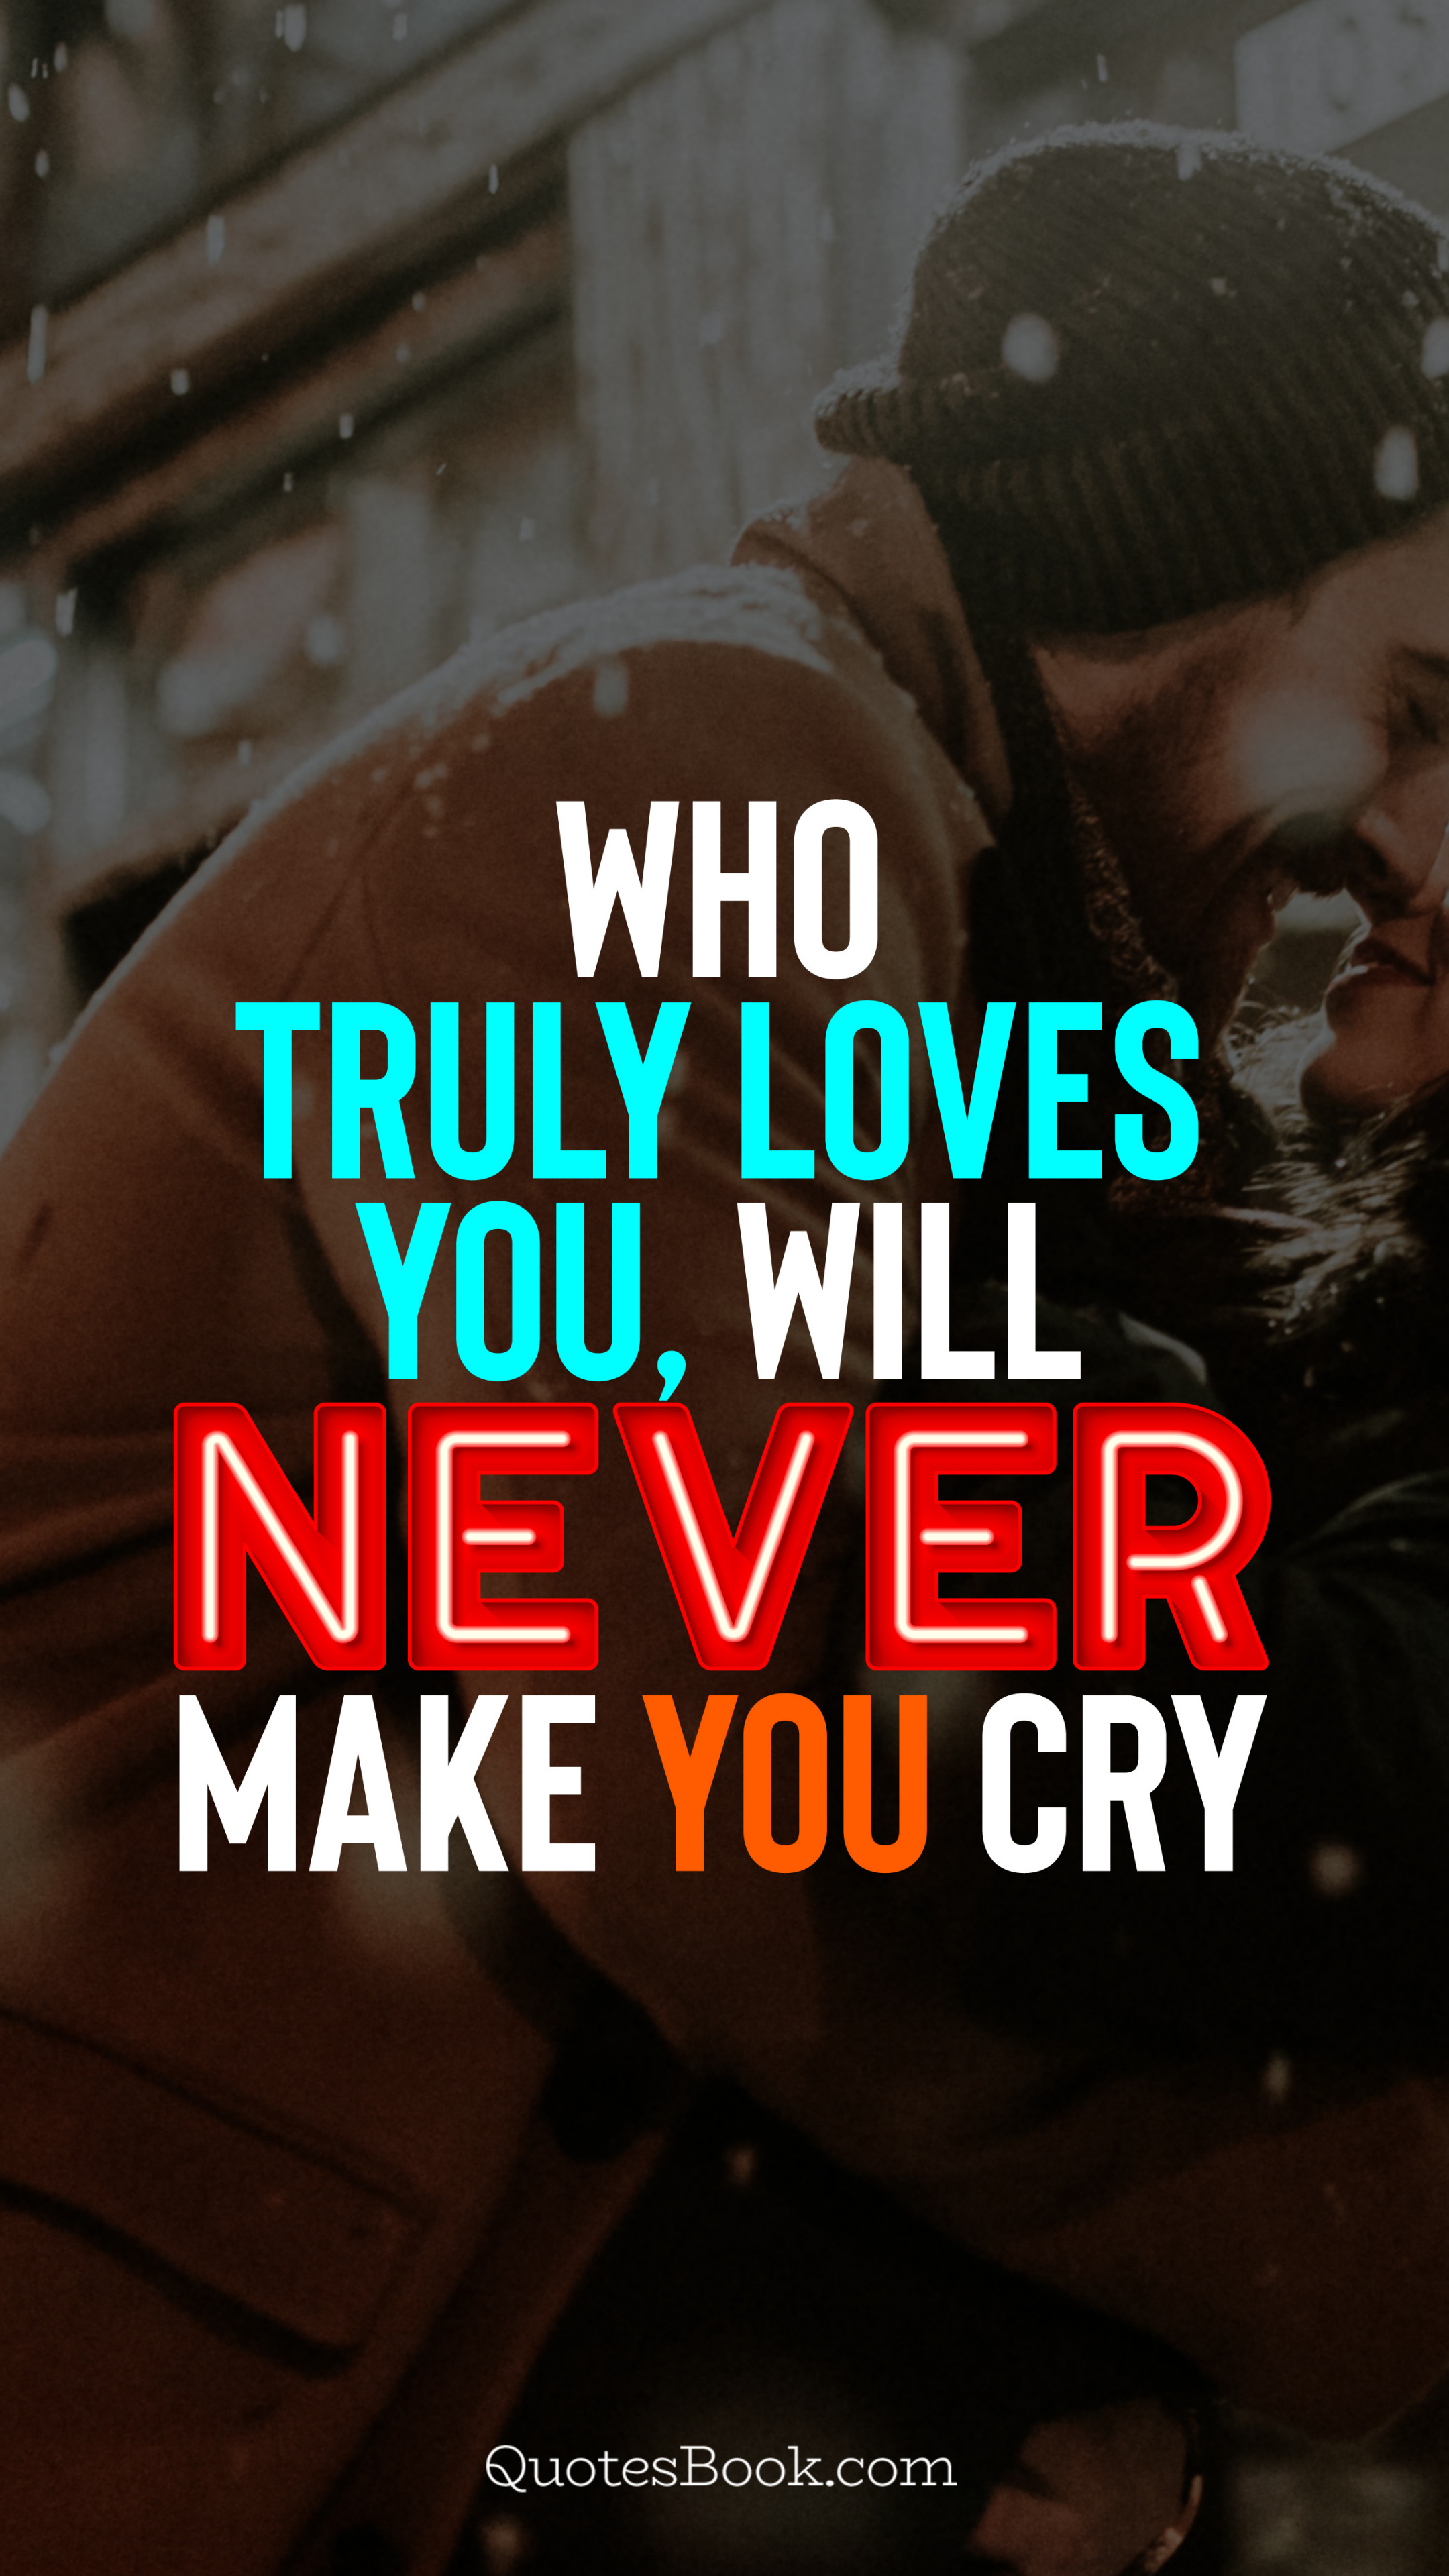 Who Truly Loves You Will Never Make You Cry Quote By Quotesbook